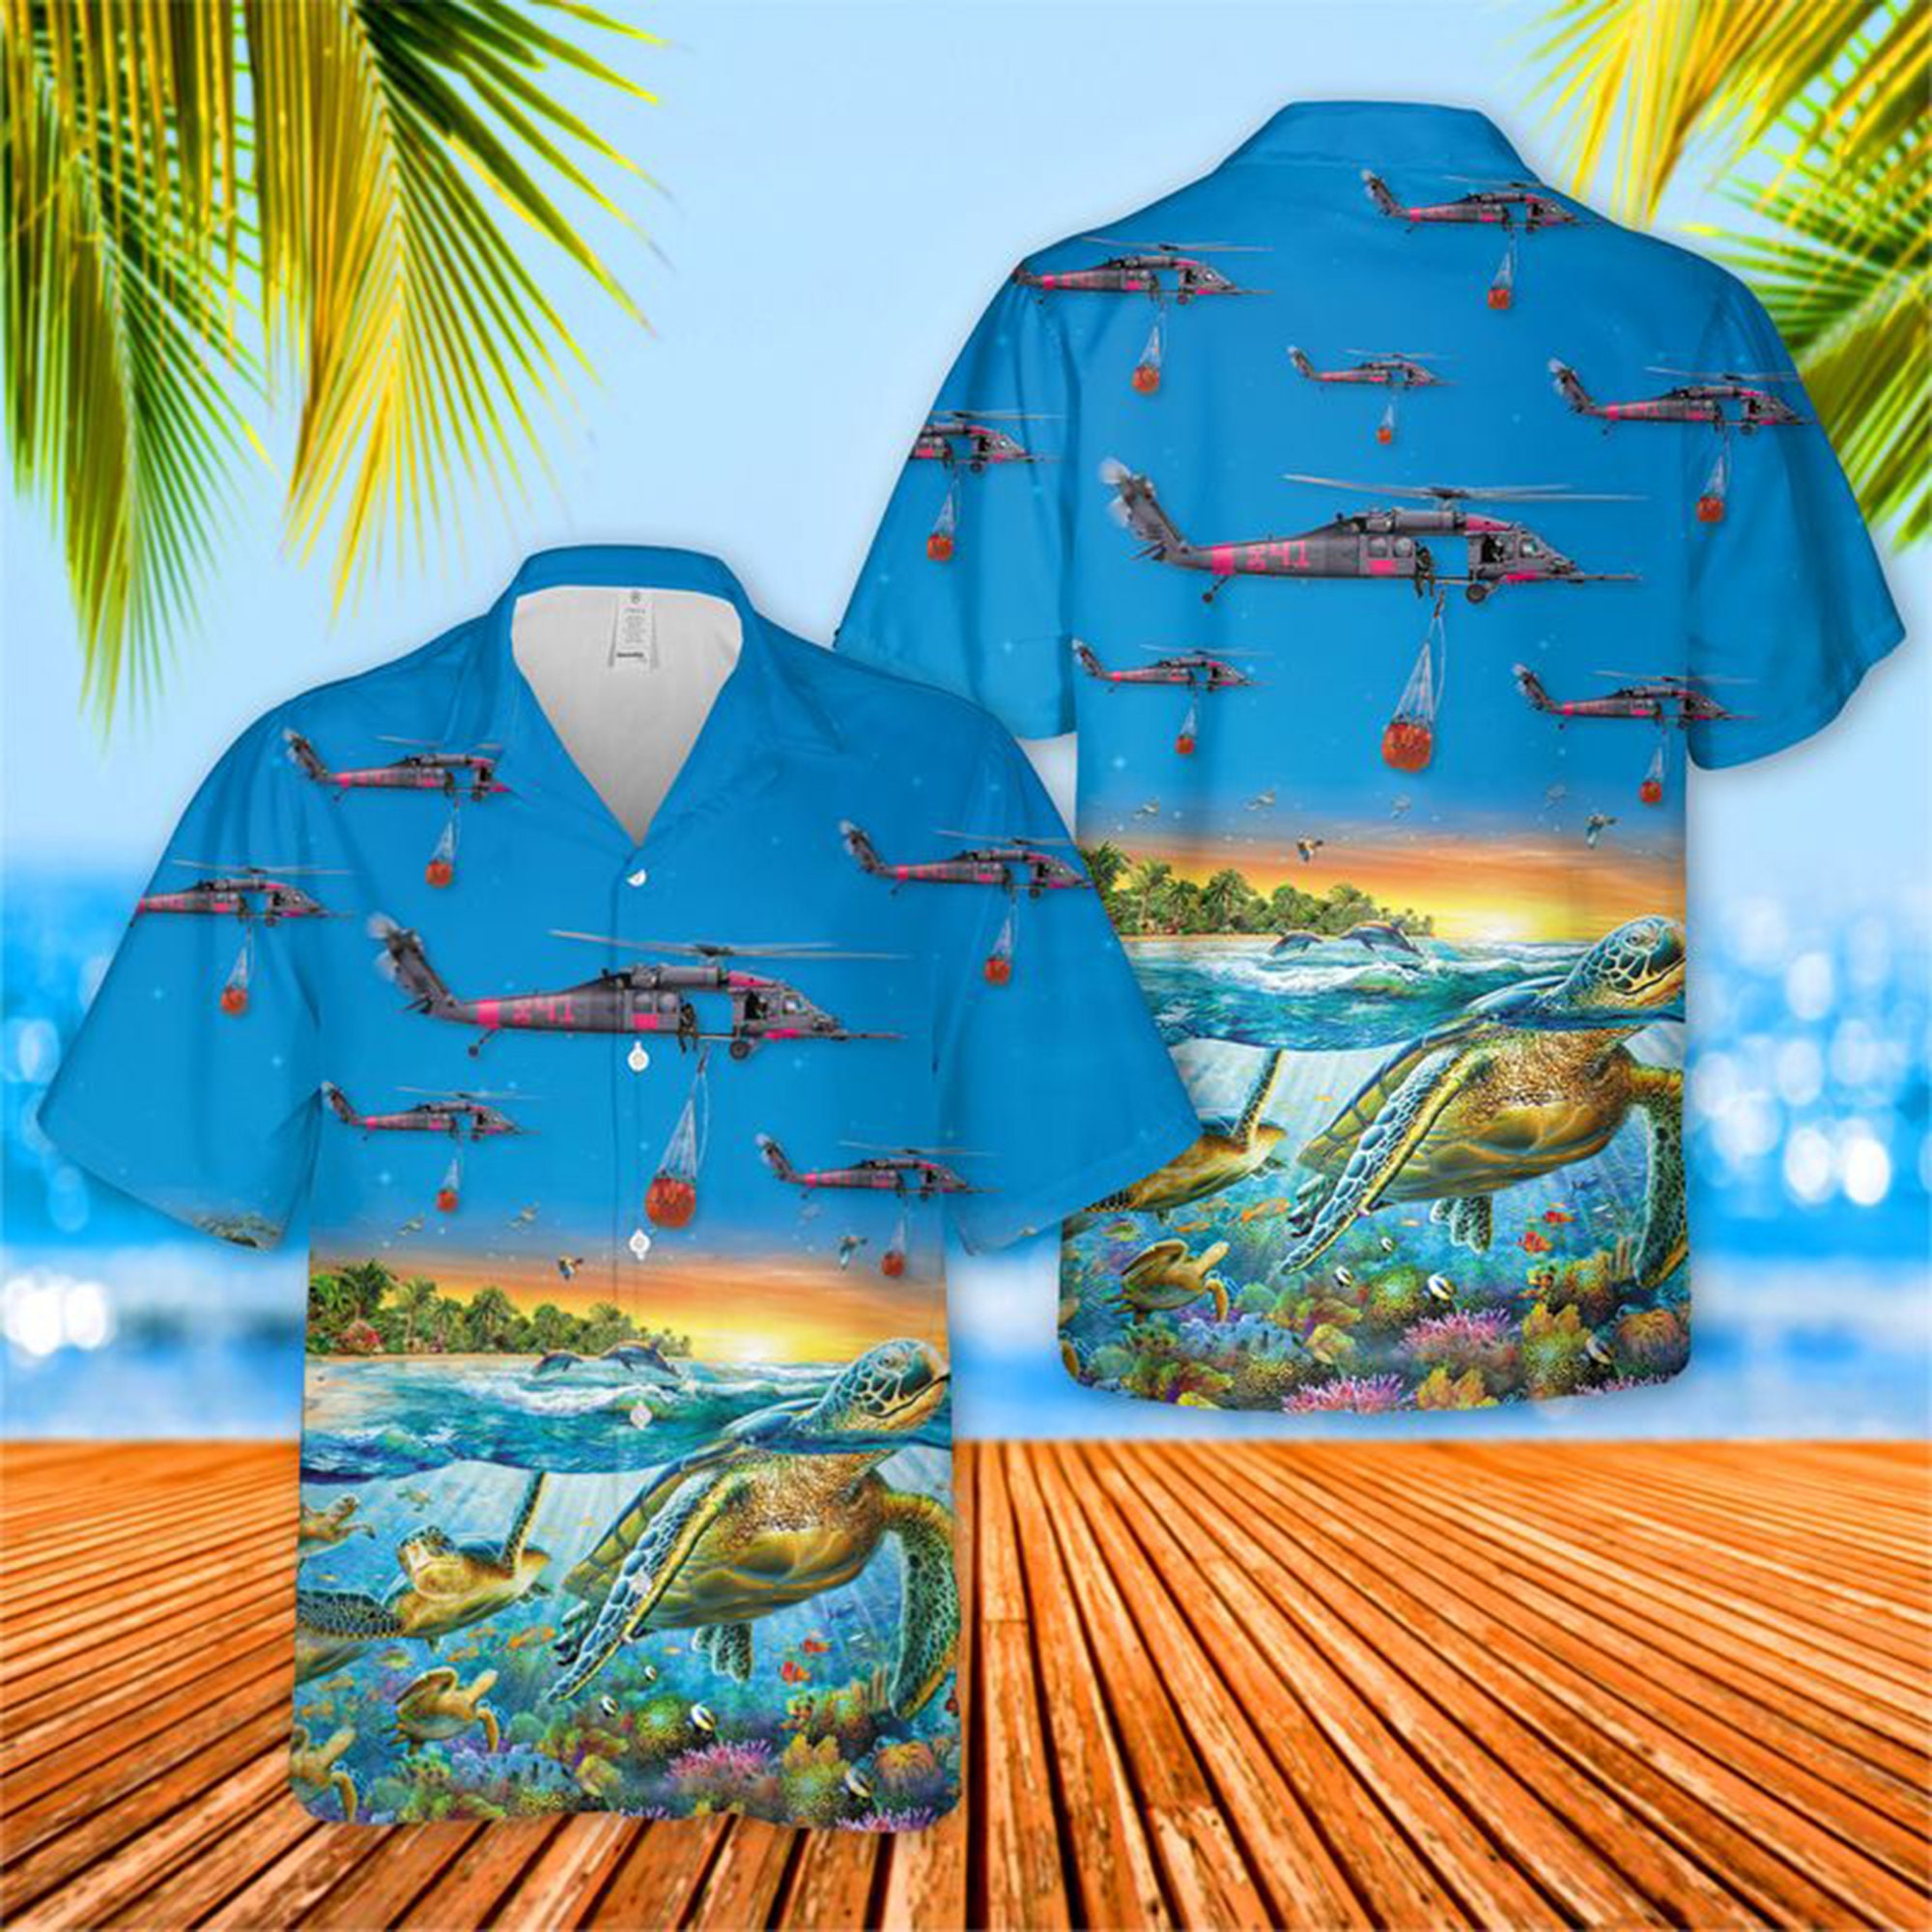 129th Rescue Wing Hh 60g Pave Hawk Turtle Hawaiian Shirt-1